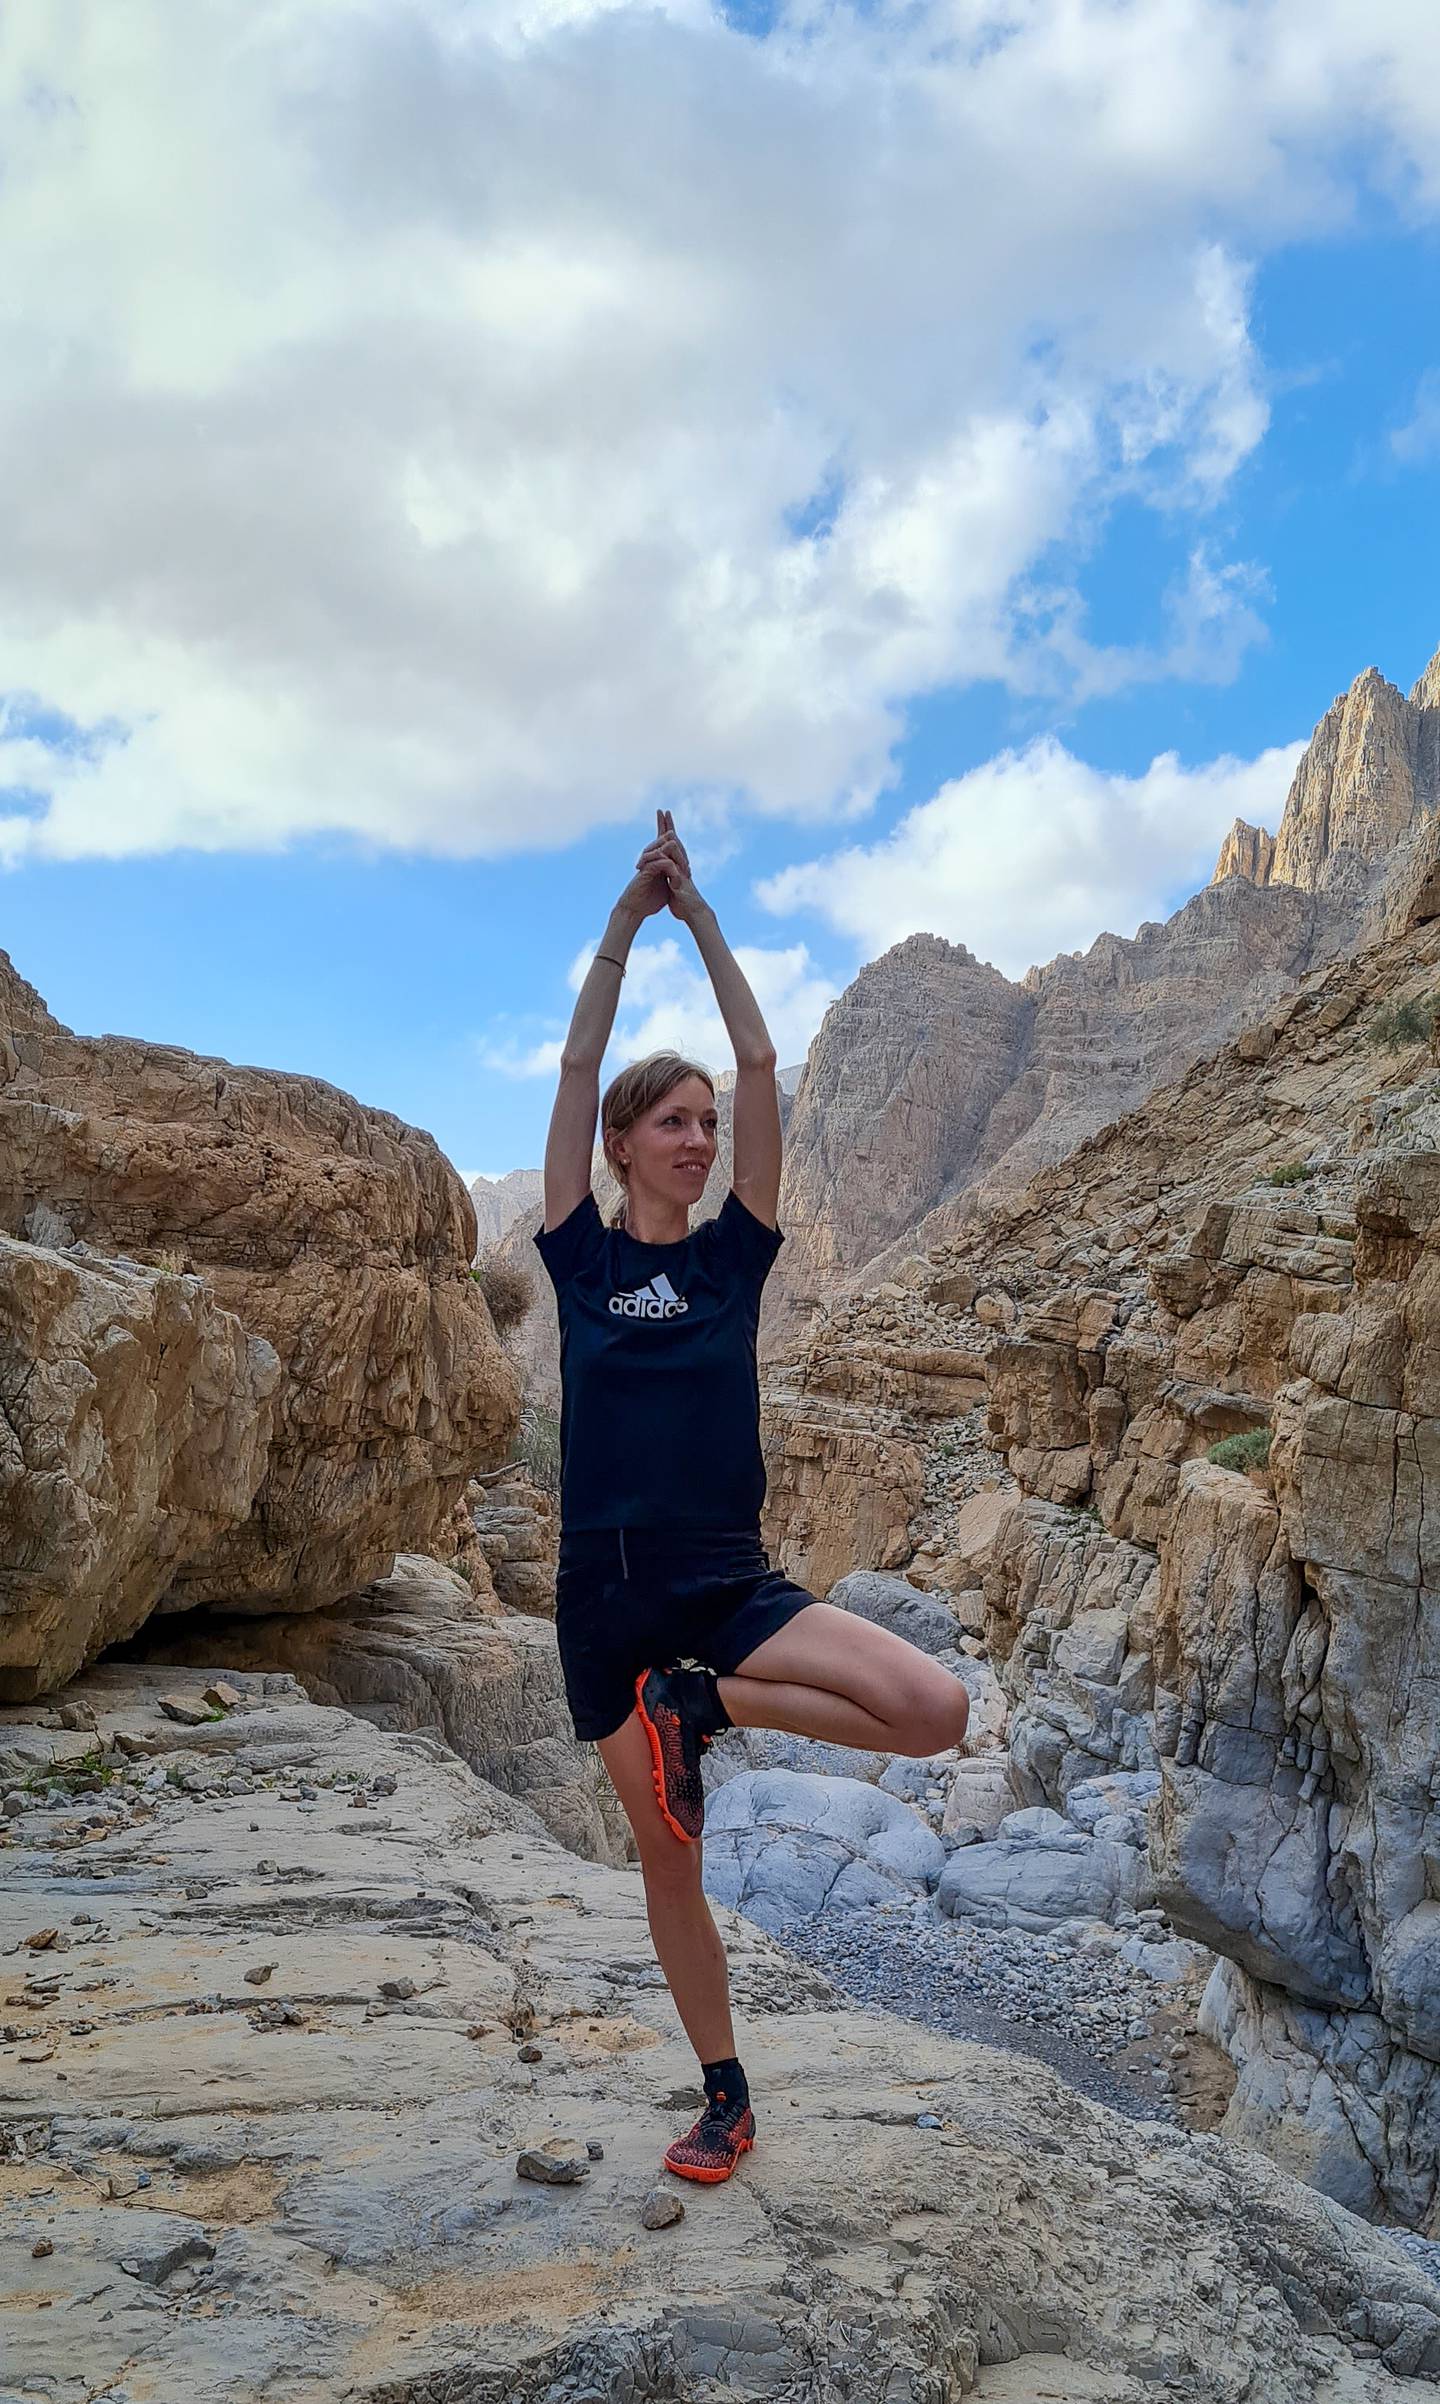 Hiking in Ras Al Khaimah, Fujairah and Umm Al Quain was how Pauline Weis discovered the UAE during her days off while working at the Luxembourg pavilion at Expo 2020 Dubai. Photo: Pauline Weis